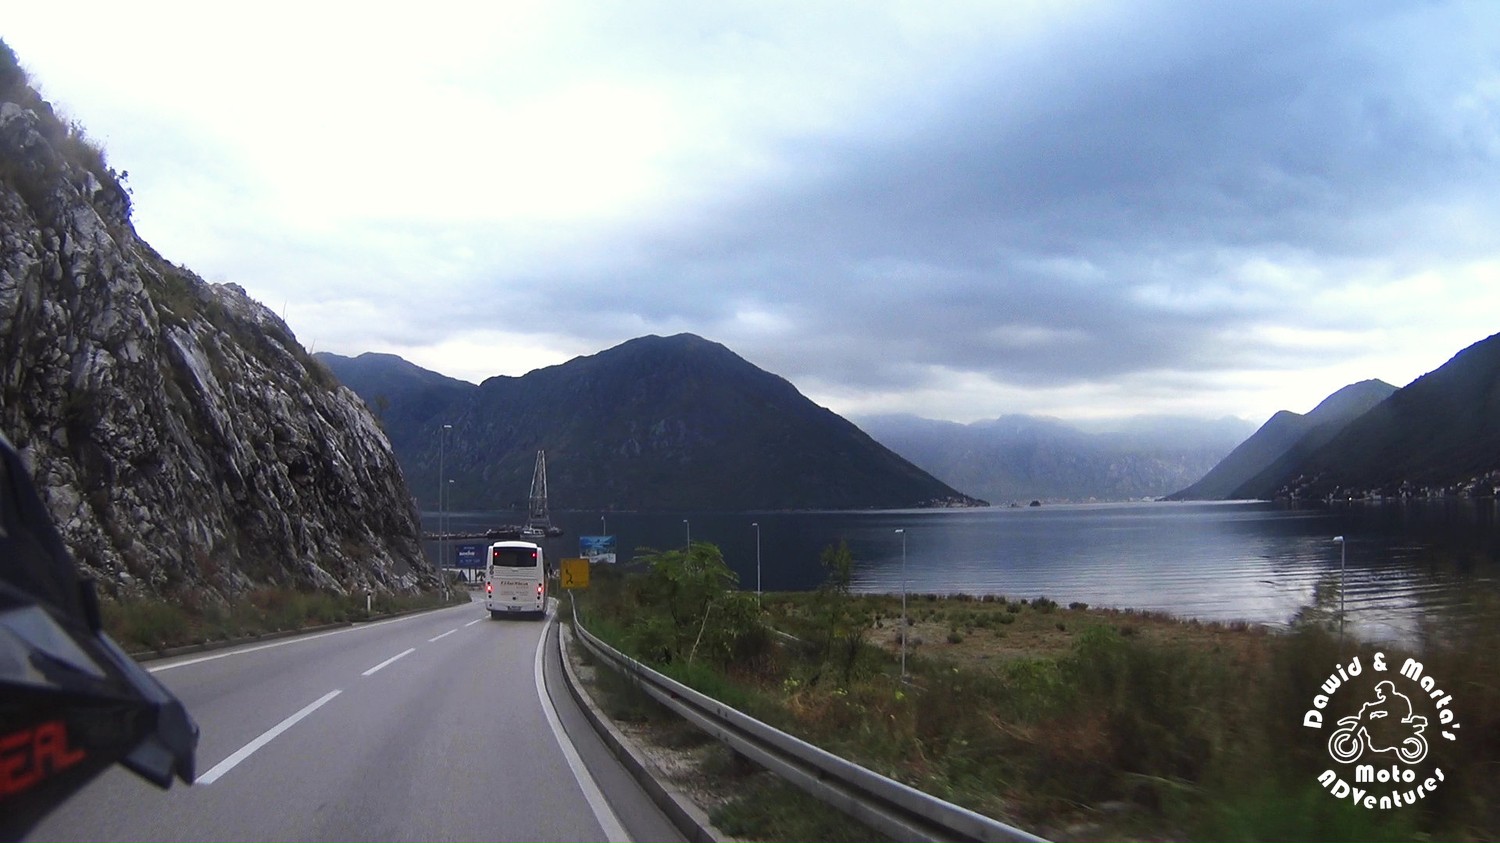 Kotor Bay seen when riding down P11 road from Niksic